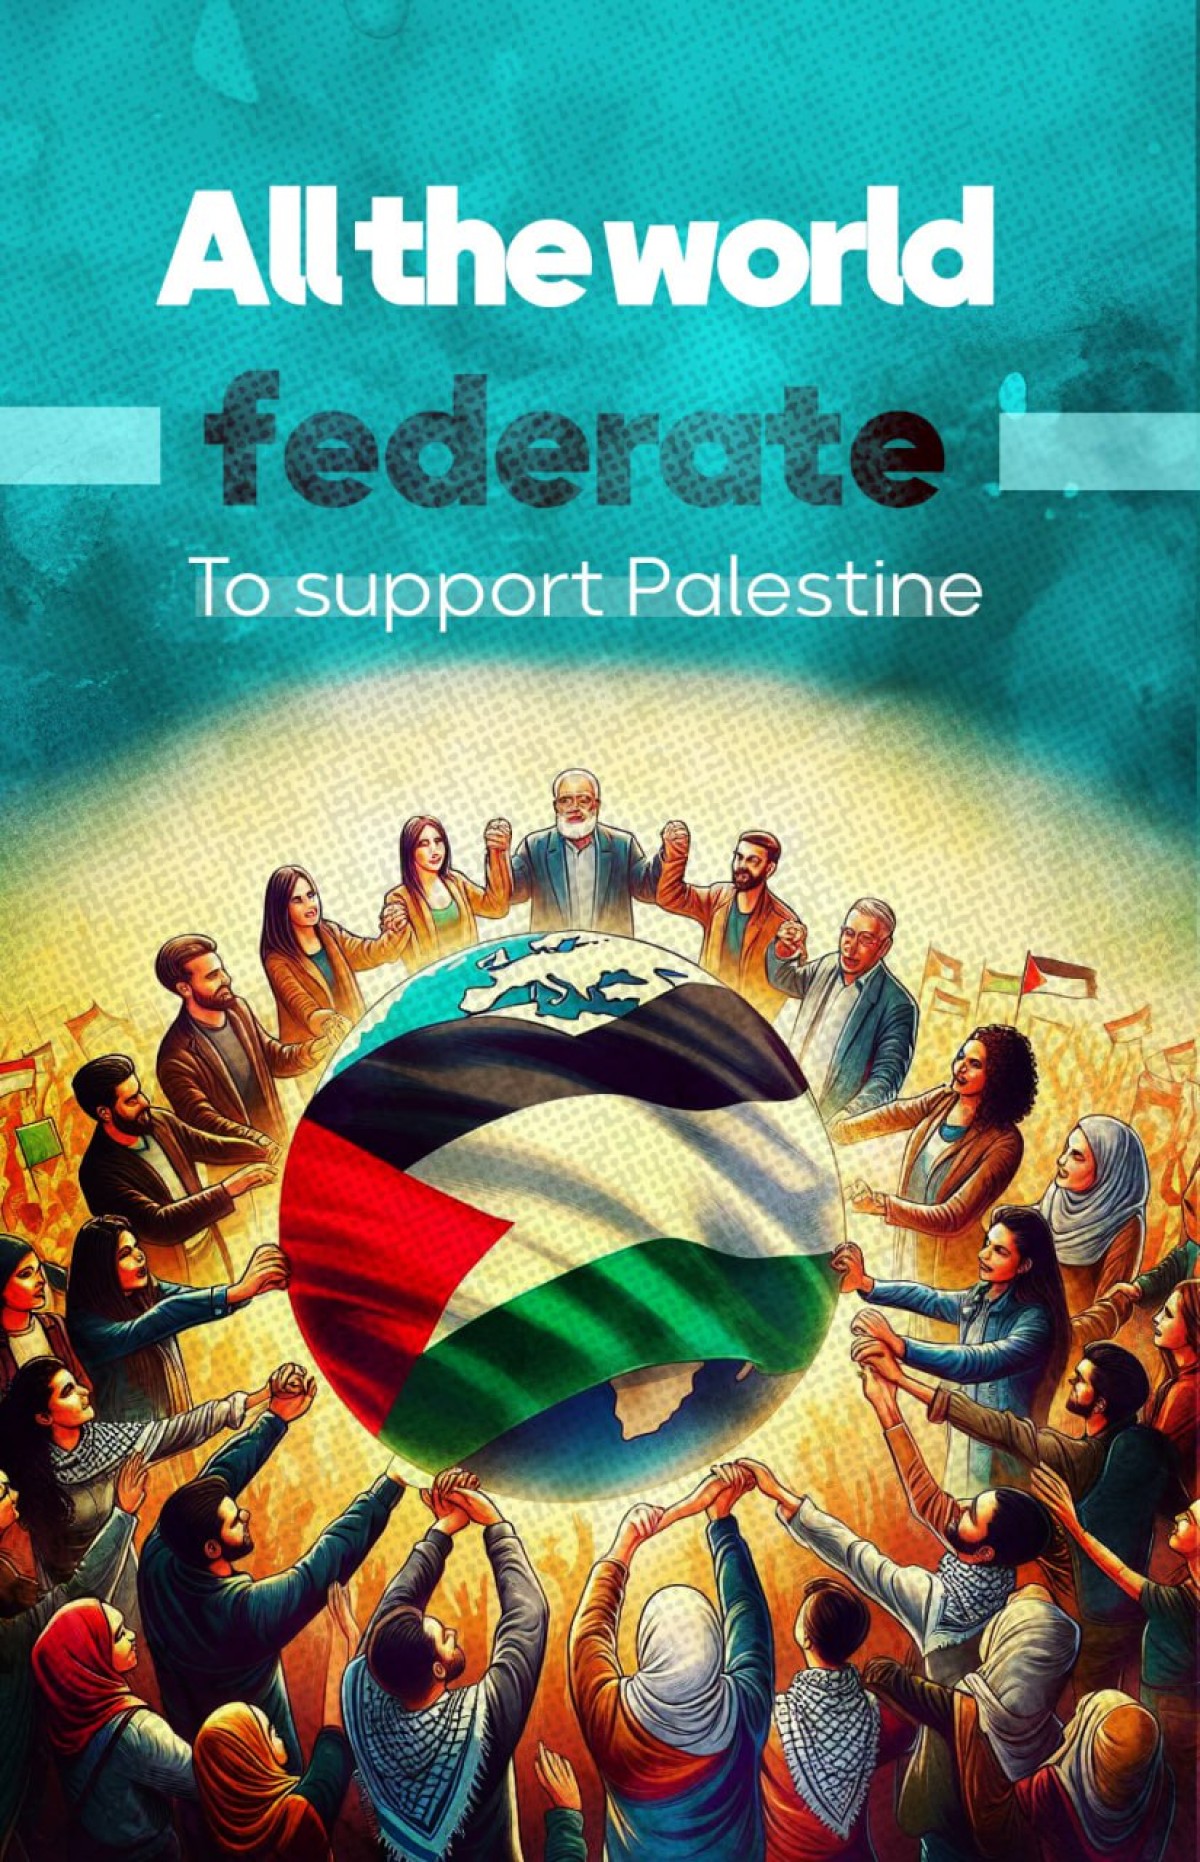 All the world federate To support Palestine